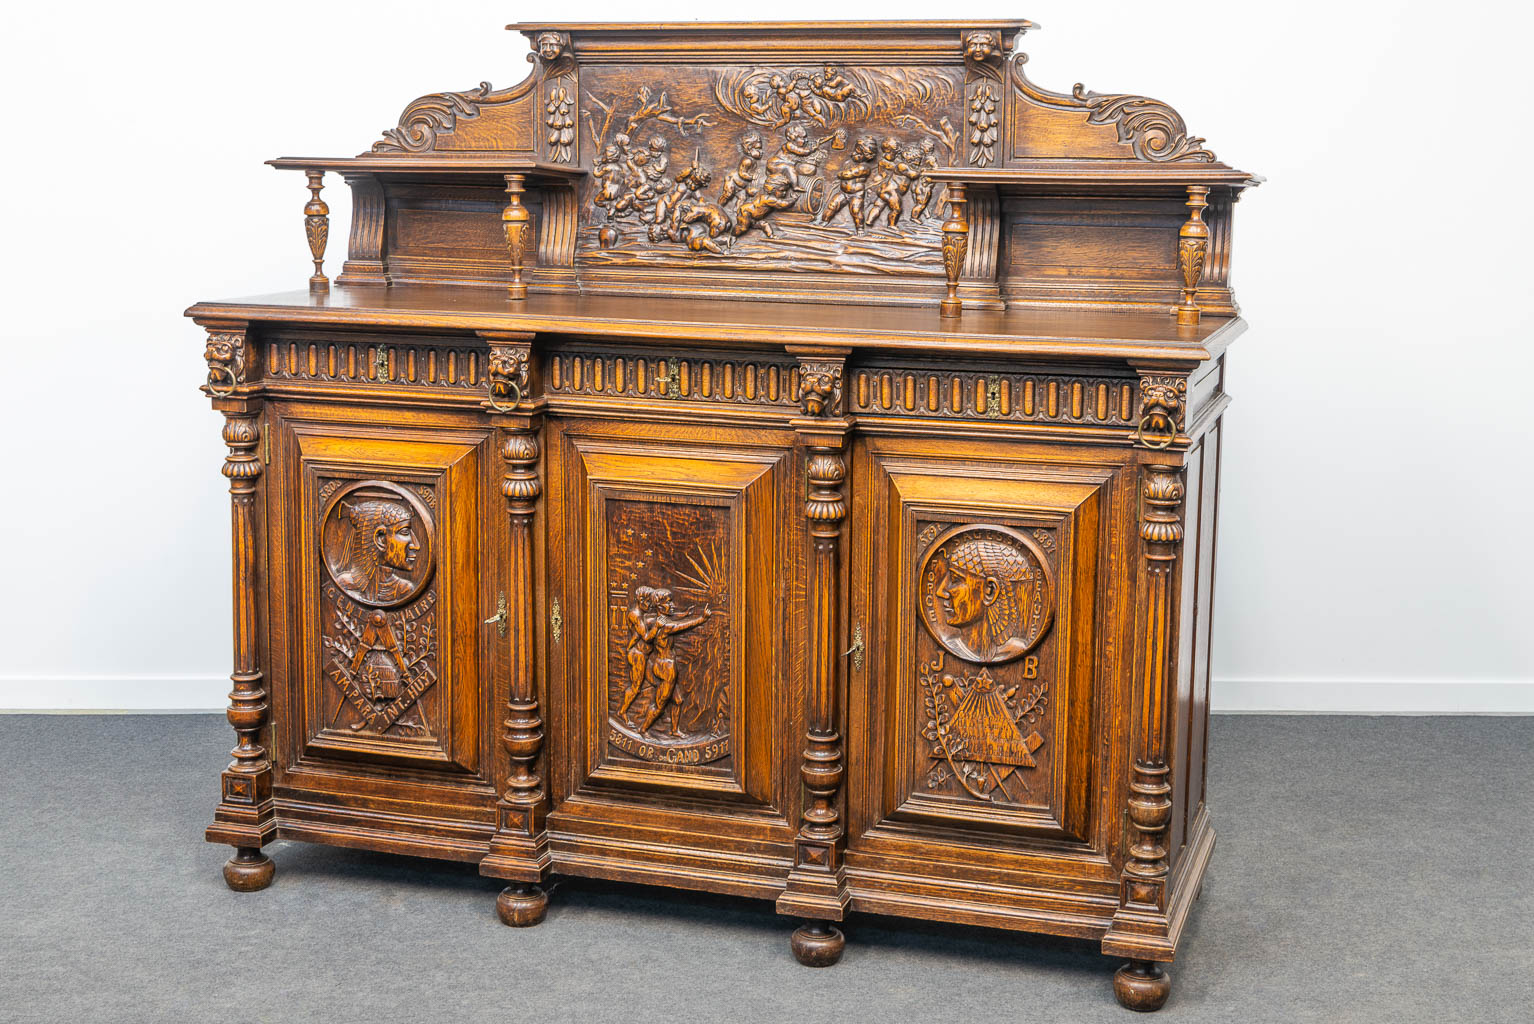 An exceptional sideboard with fine sculptured panels in symbols of the free masons, framaconnerie. Made in Eeklo. (H:172,5cm)